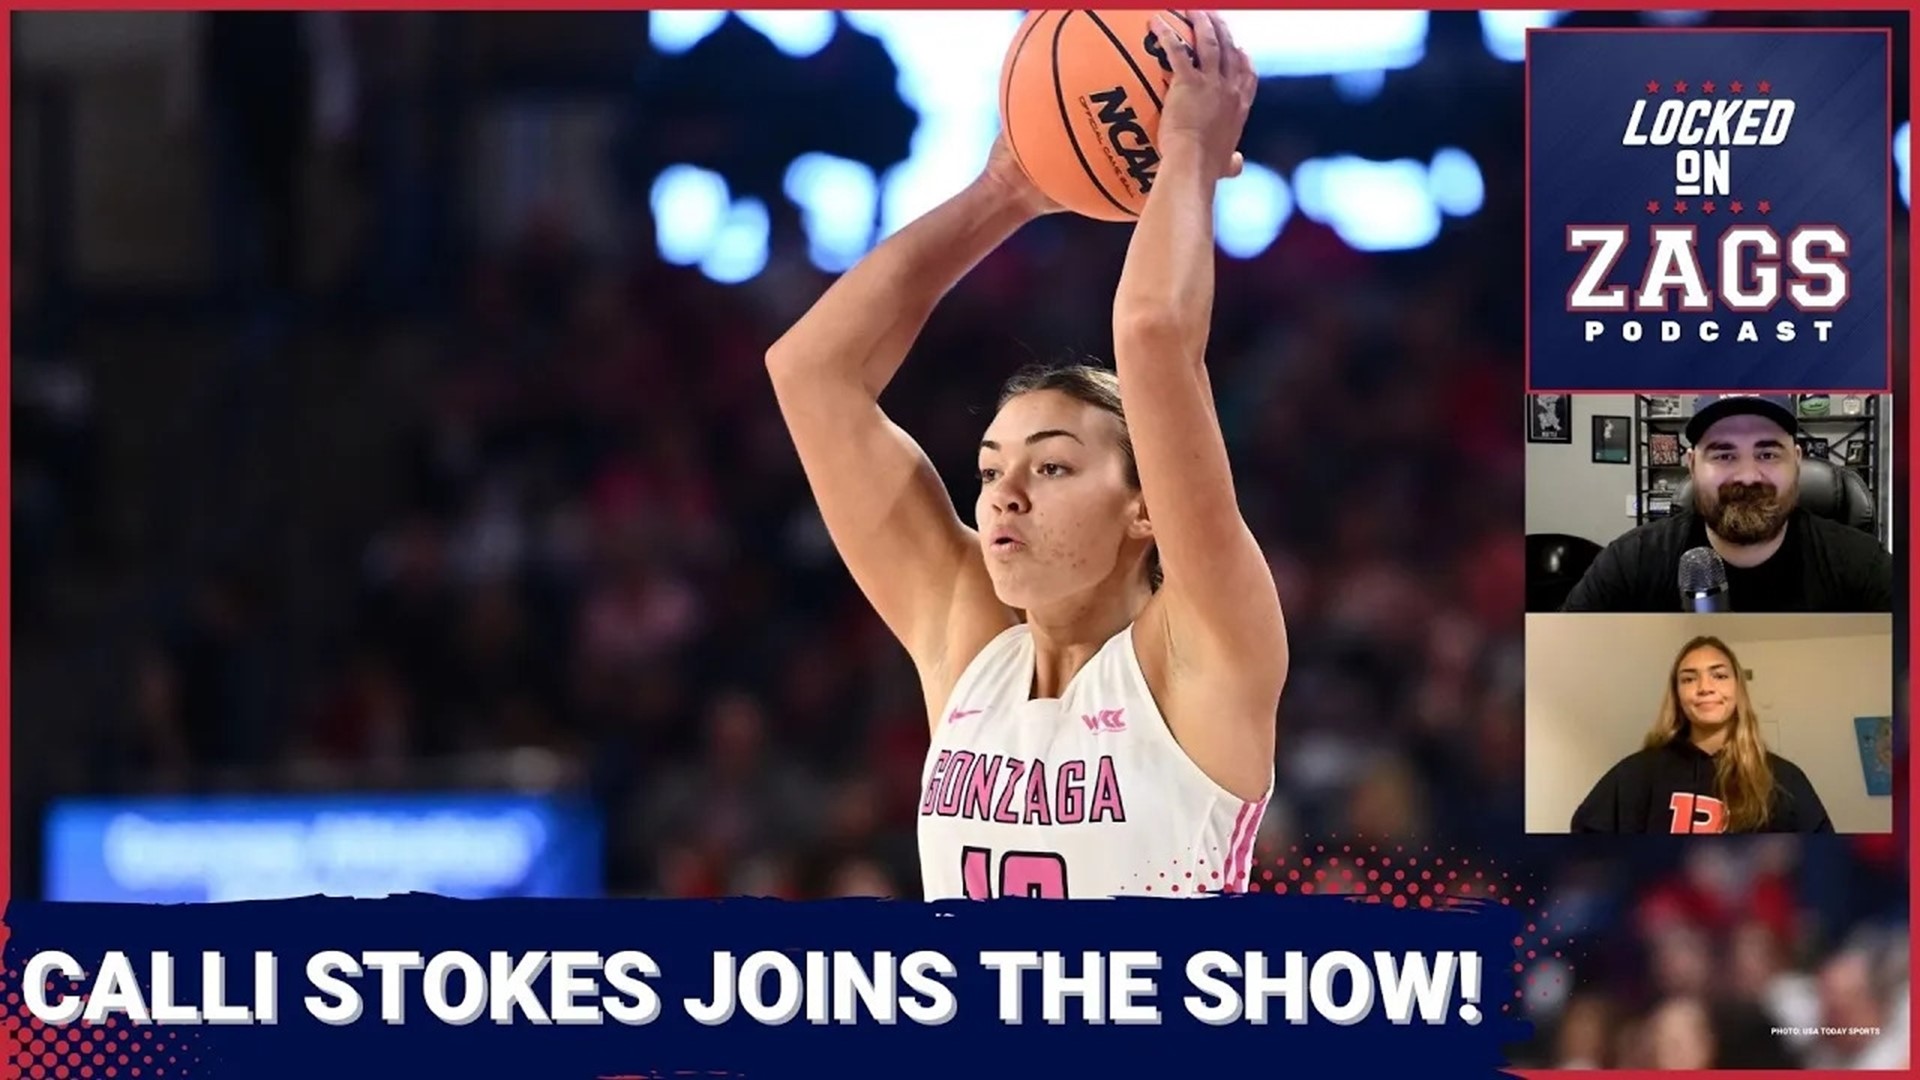 Gonzaga women's basketball guard Calli Stokes joins the show to discuss her experience at the 3X nationals with teammates.